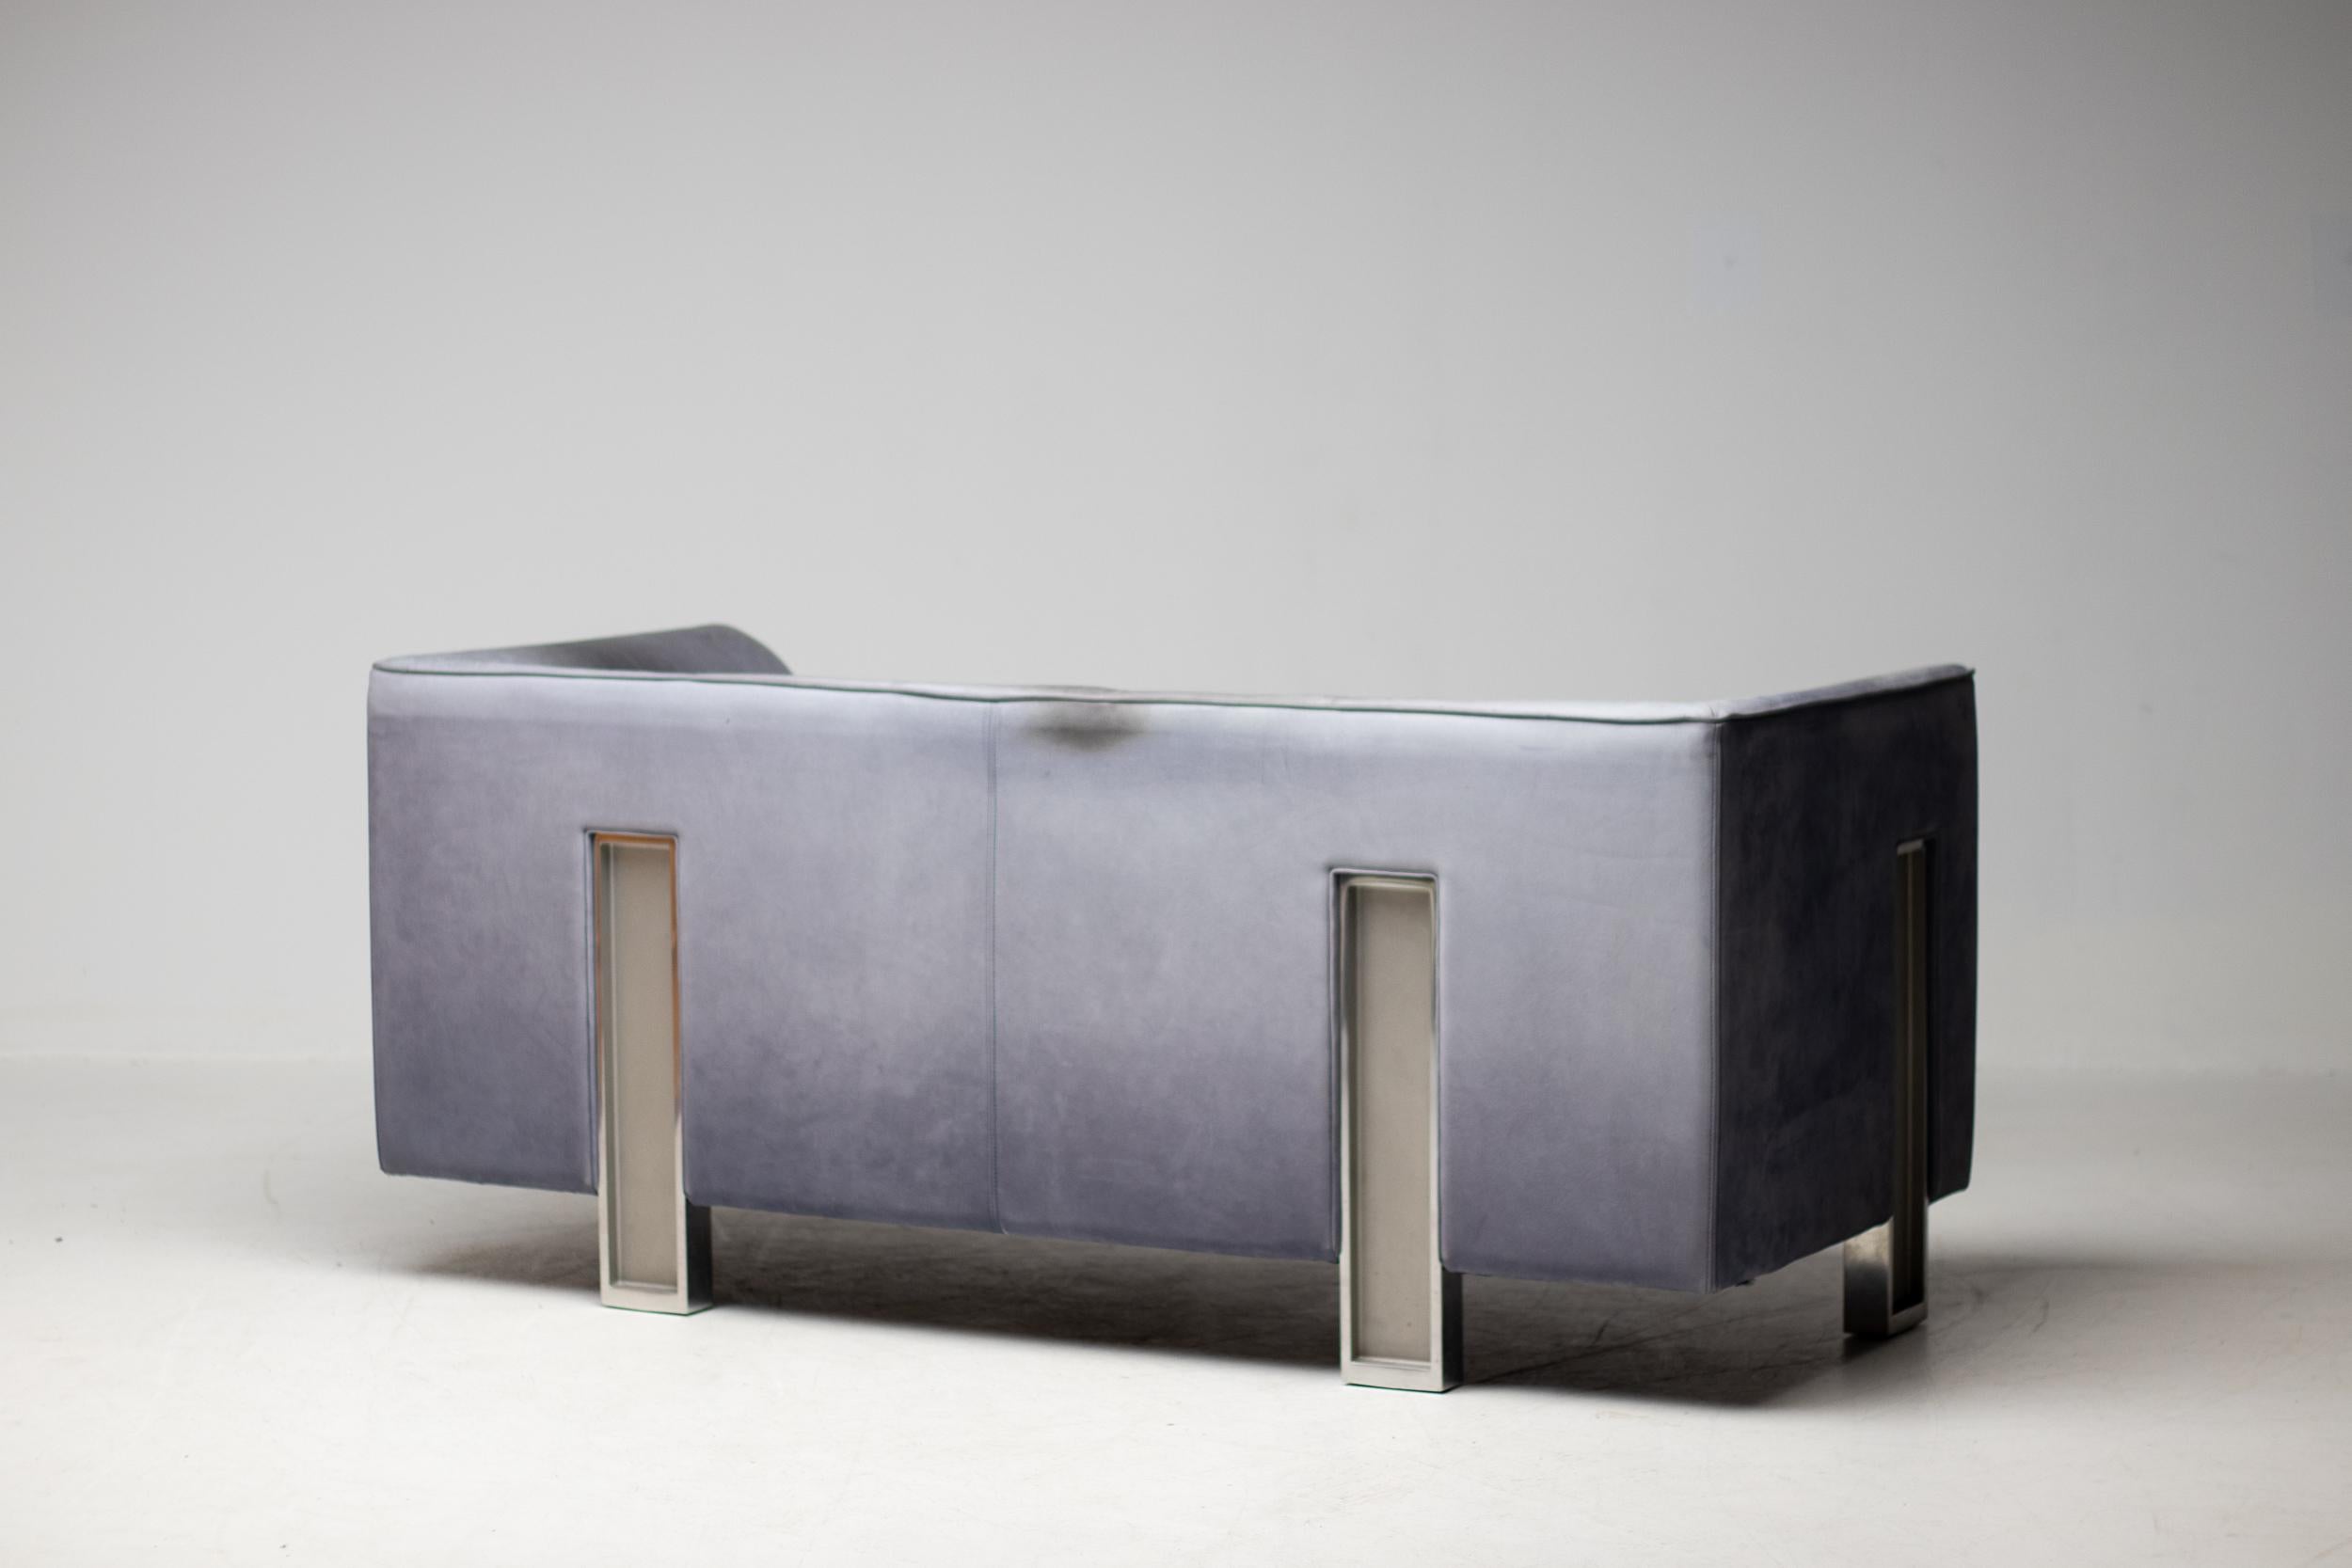 Architectural sofa designed by Japanese architect Shigeru Uchida.
This spectacular sofa with die cast aluminum legs was in production for only a short while in 1995.
The thick light blue/grey buffalo leather is patinated from 25 years of careful